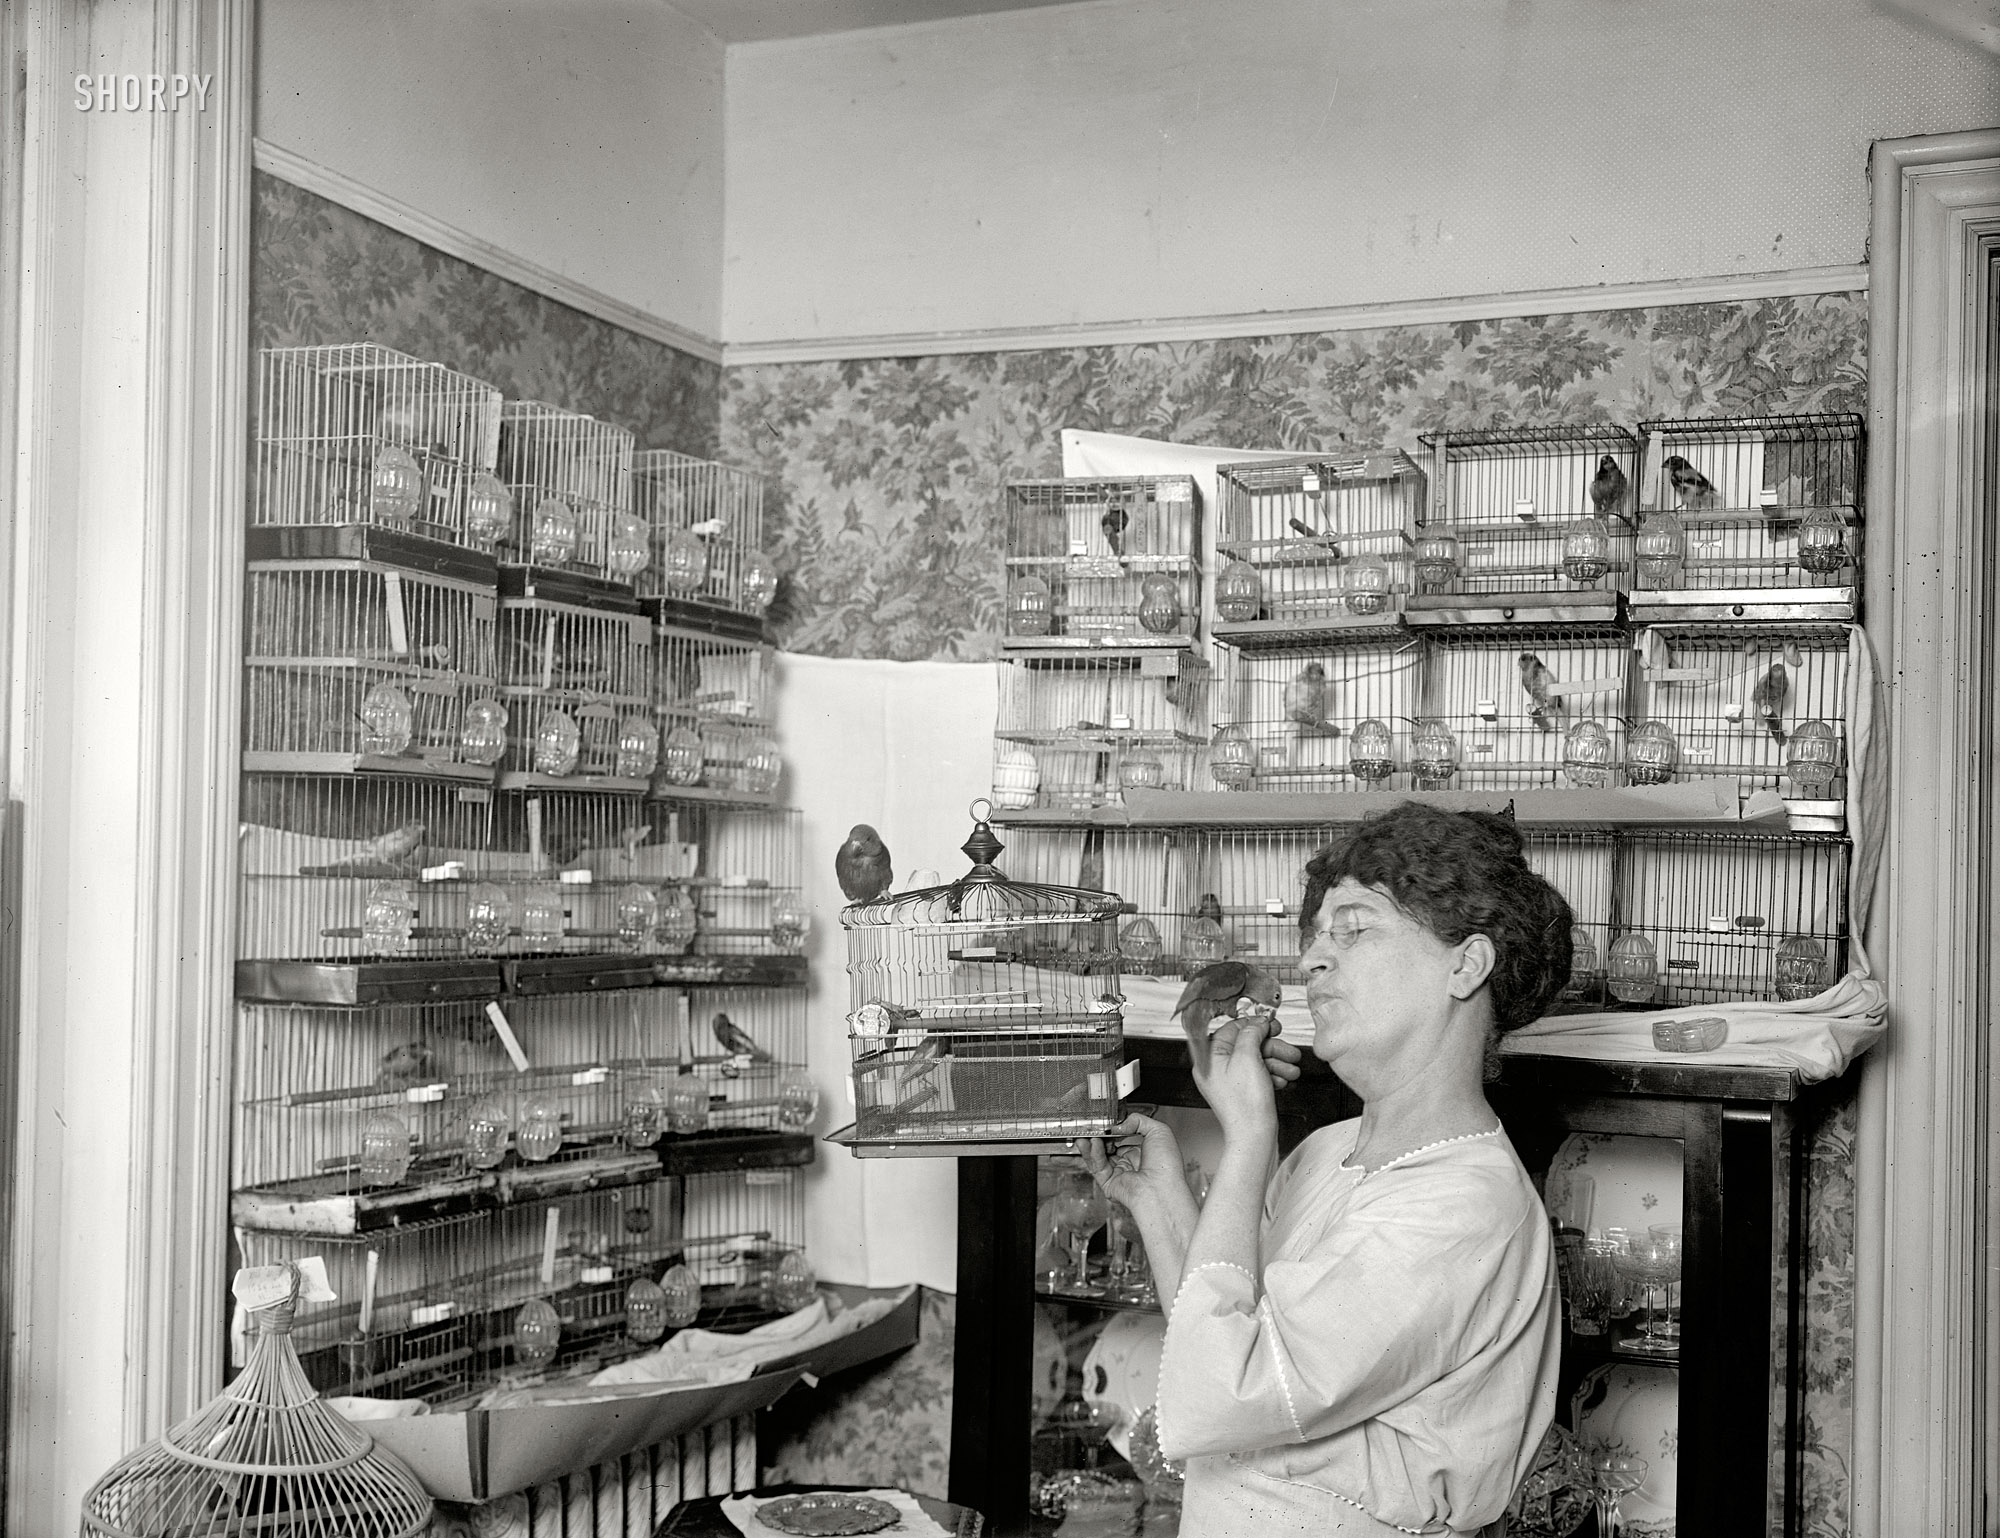 August 3, 1921. Washington, D.C. "Mrs. Jno. W. Clarke." Shown tweeting. National Photo Company Collection glass negative. View full size.